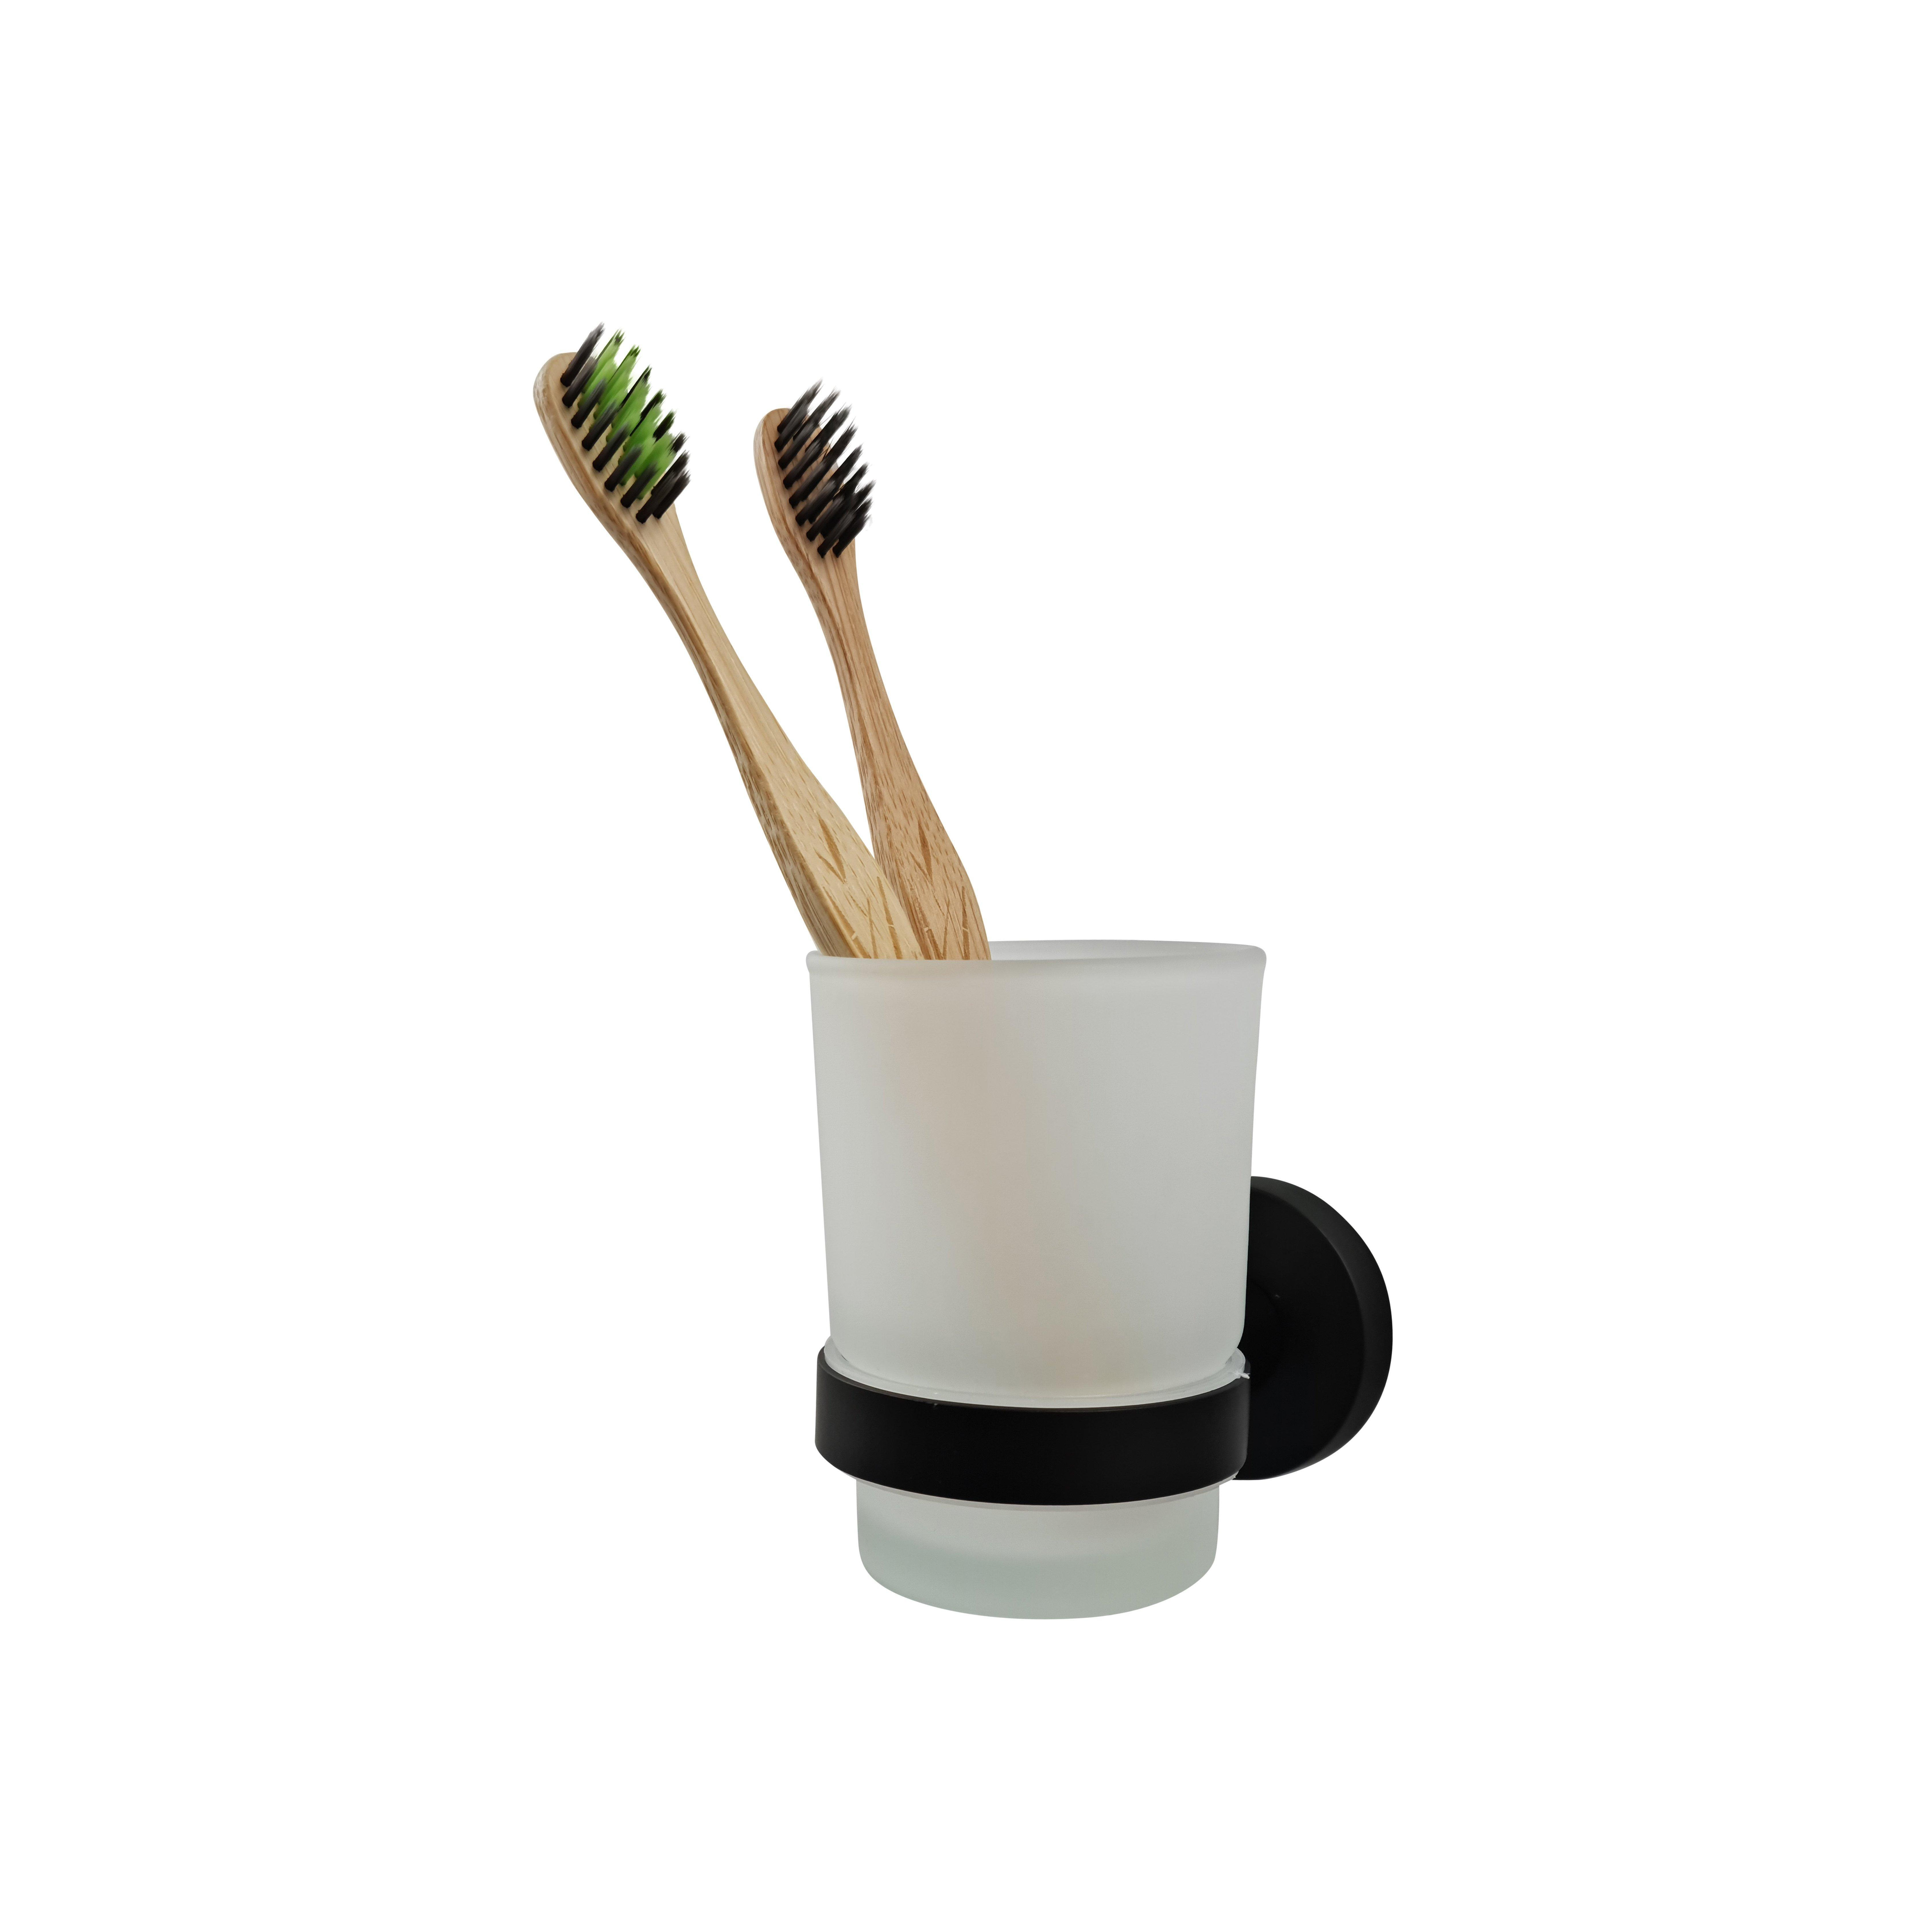 Modern Black Finish Toothbrush Holder with Glass Cup Wall Mounted Accessory - image 1